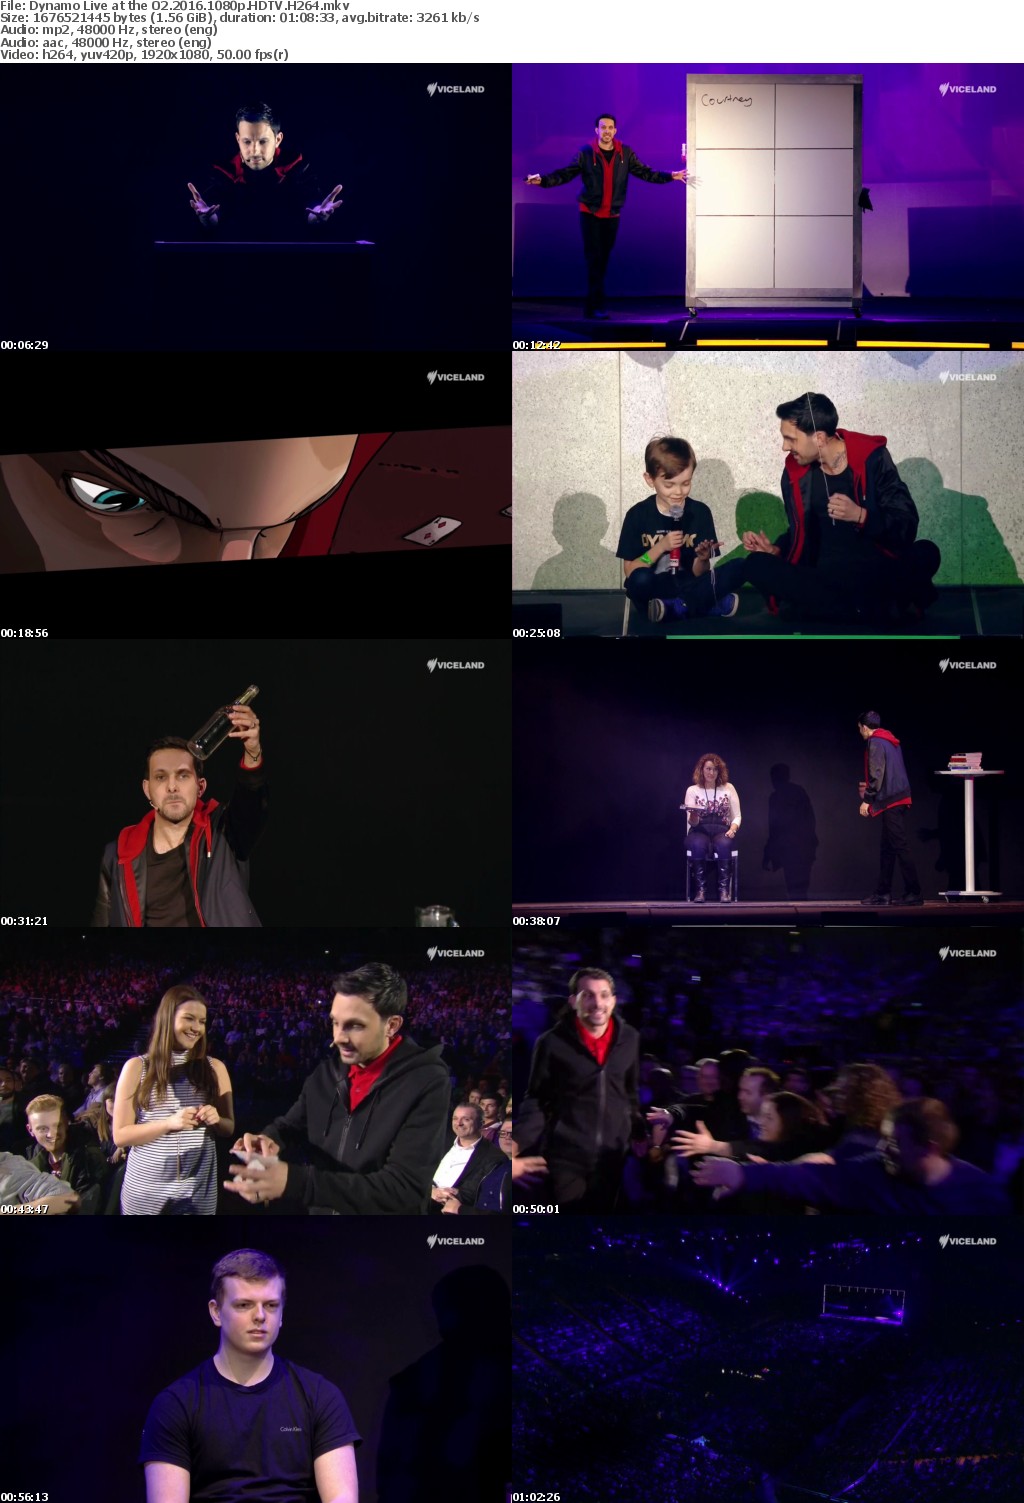 Dynamo Magician Impossible Special - Live at The O2(Seeing is Believing) - 1080p HDTV H264